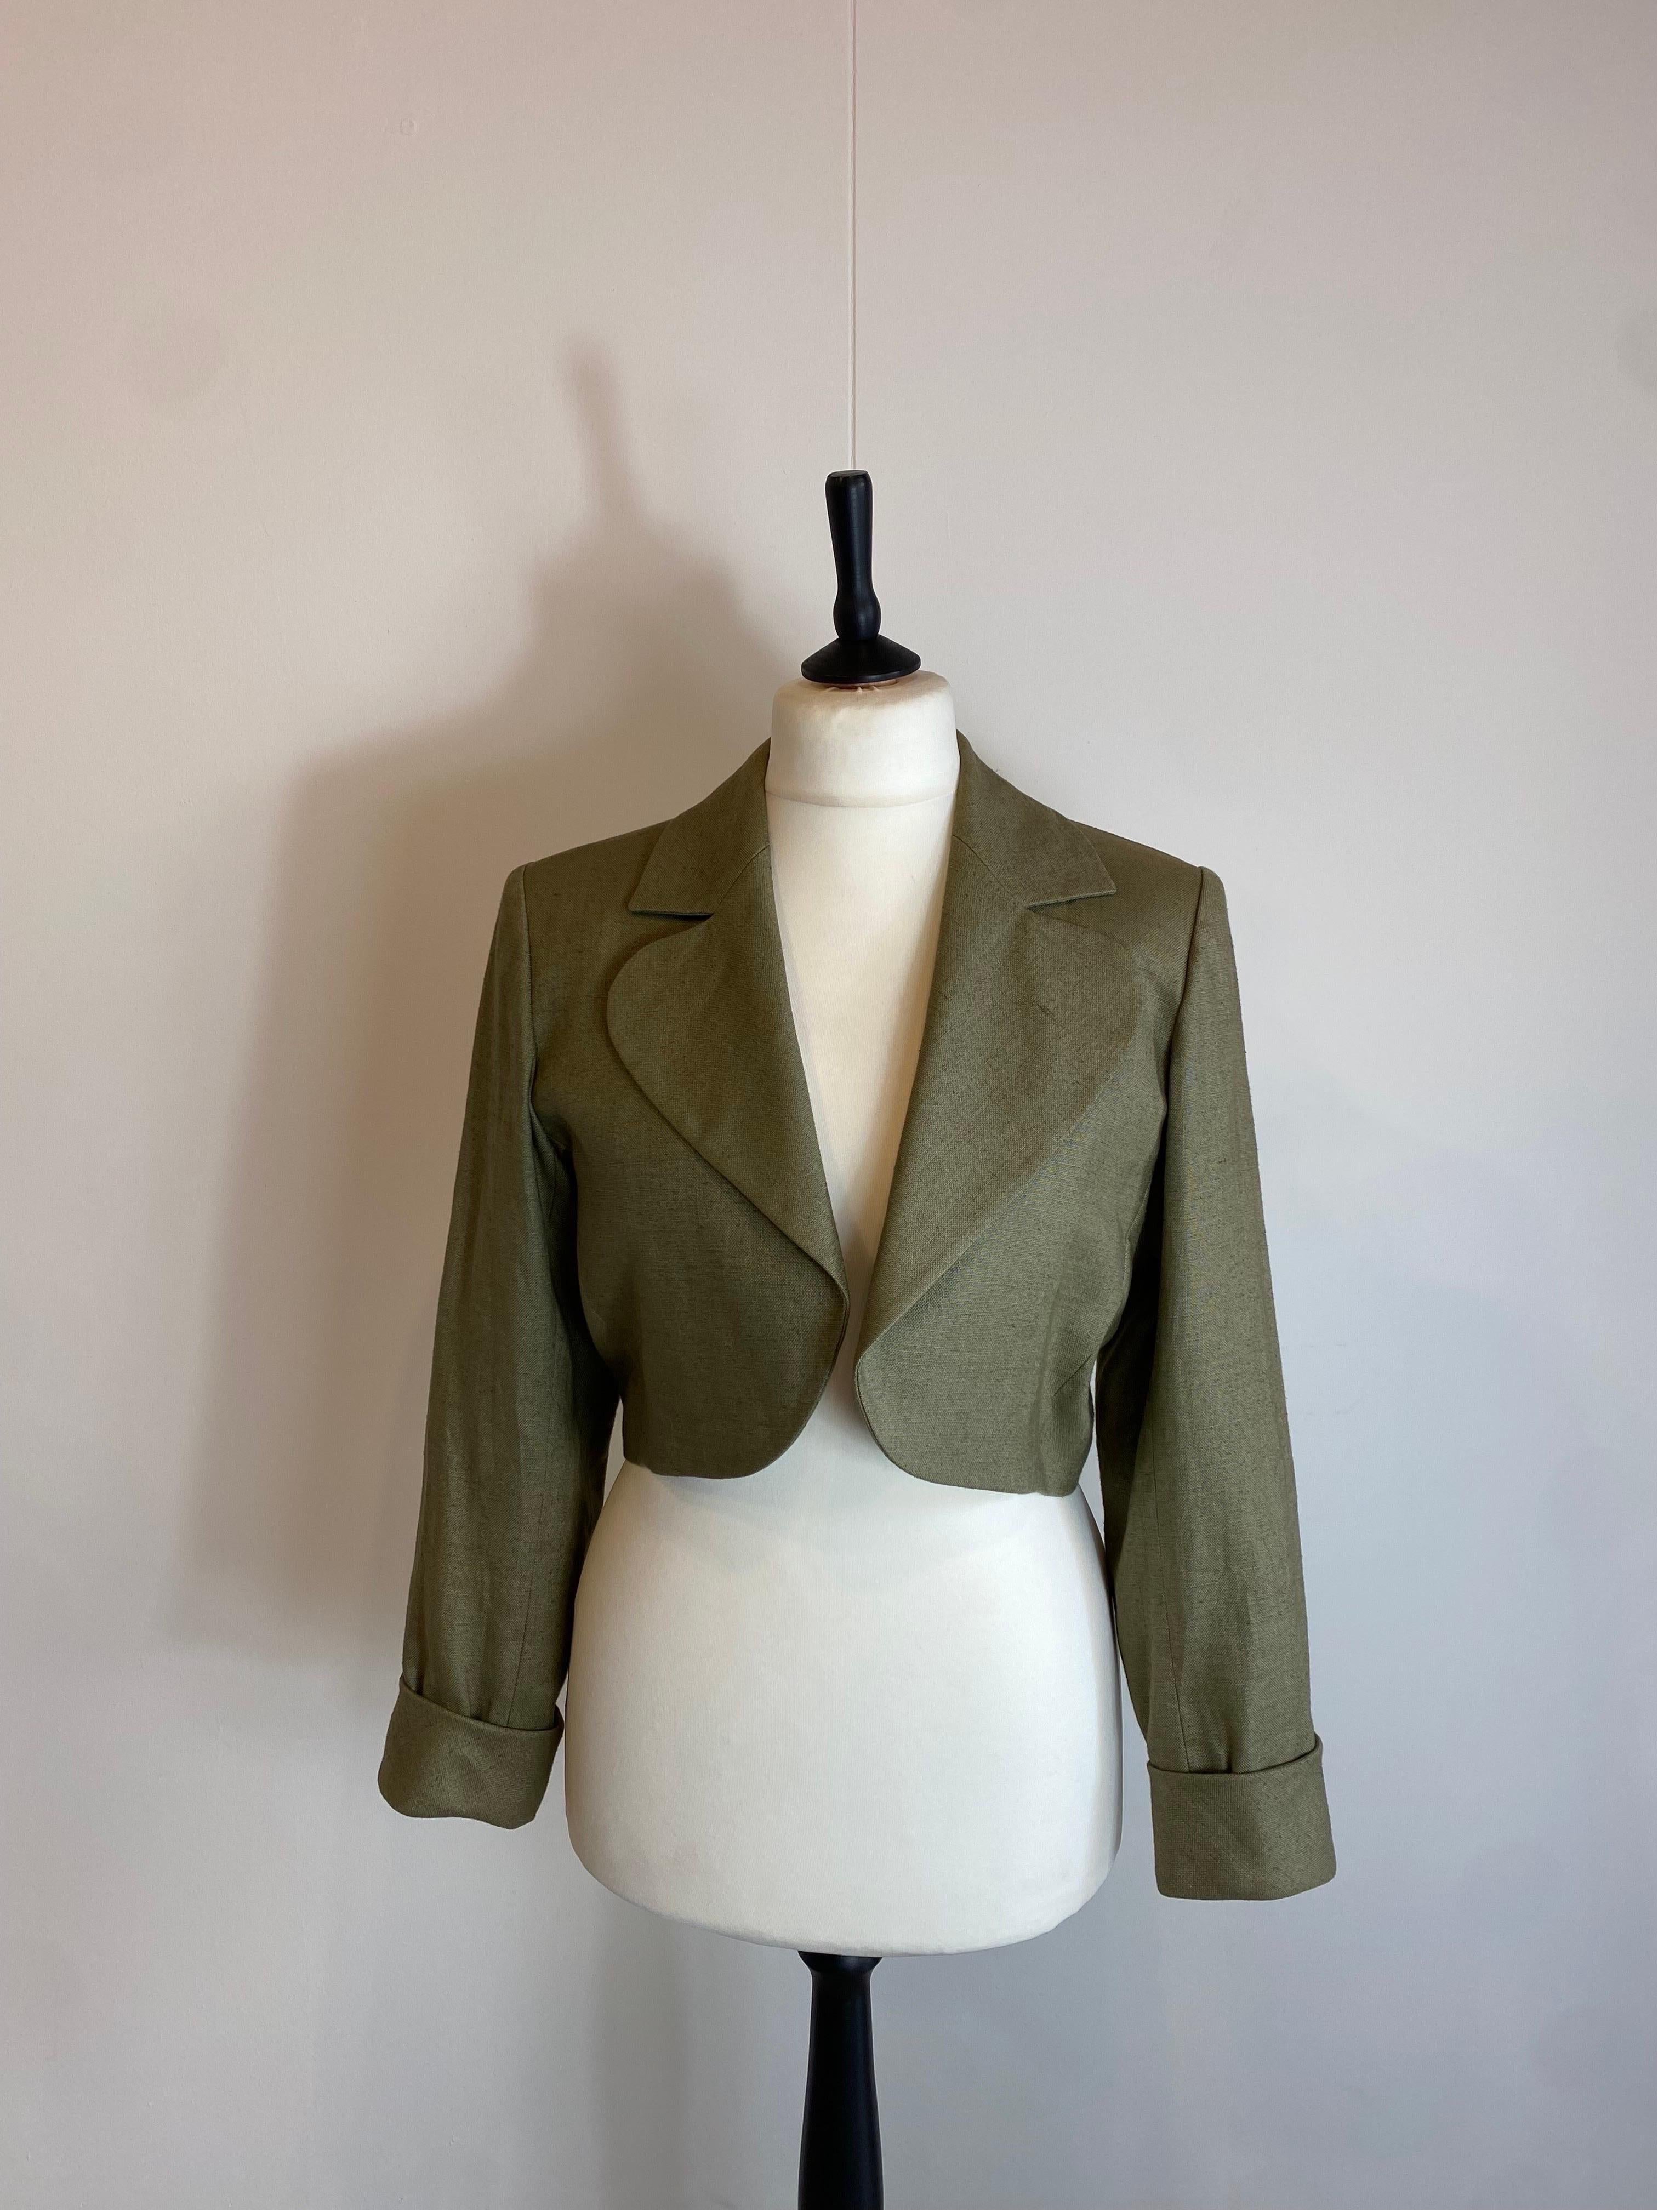 Saint Laurent vintage bolero jacket.
Composition label missing.
We think it's linen. Lined.
Features padded shoulders.
Size 44 French
Shoulders 46 cm
Bust 50 cm
Length 48 cm
Sleeve 60 cm
Excellent general condition, with minimal signs of normal use.